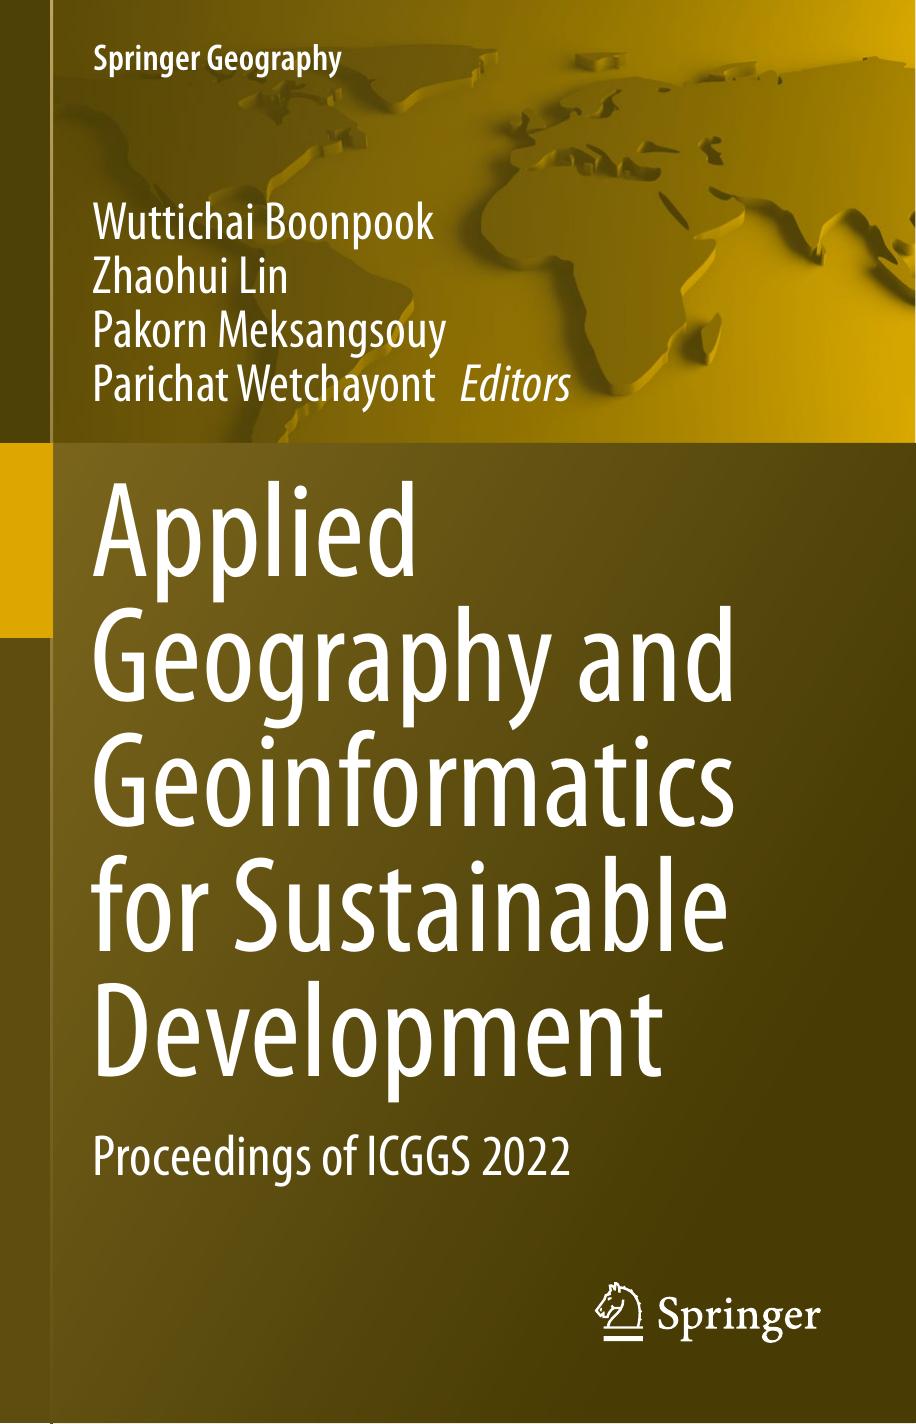 (Springer Geography)  Applied Geography and Geoinformatics for Sustainable Development  Proceedings of ICGGS 2022